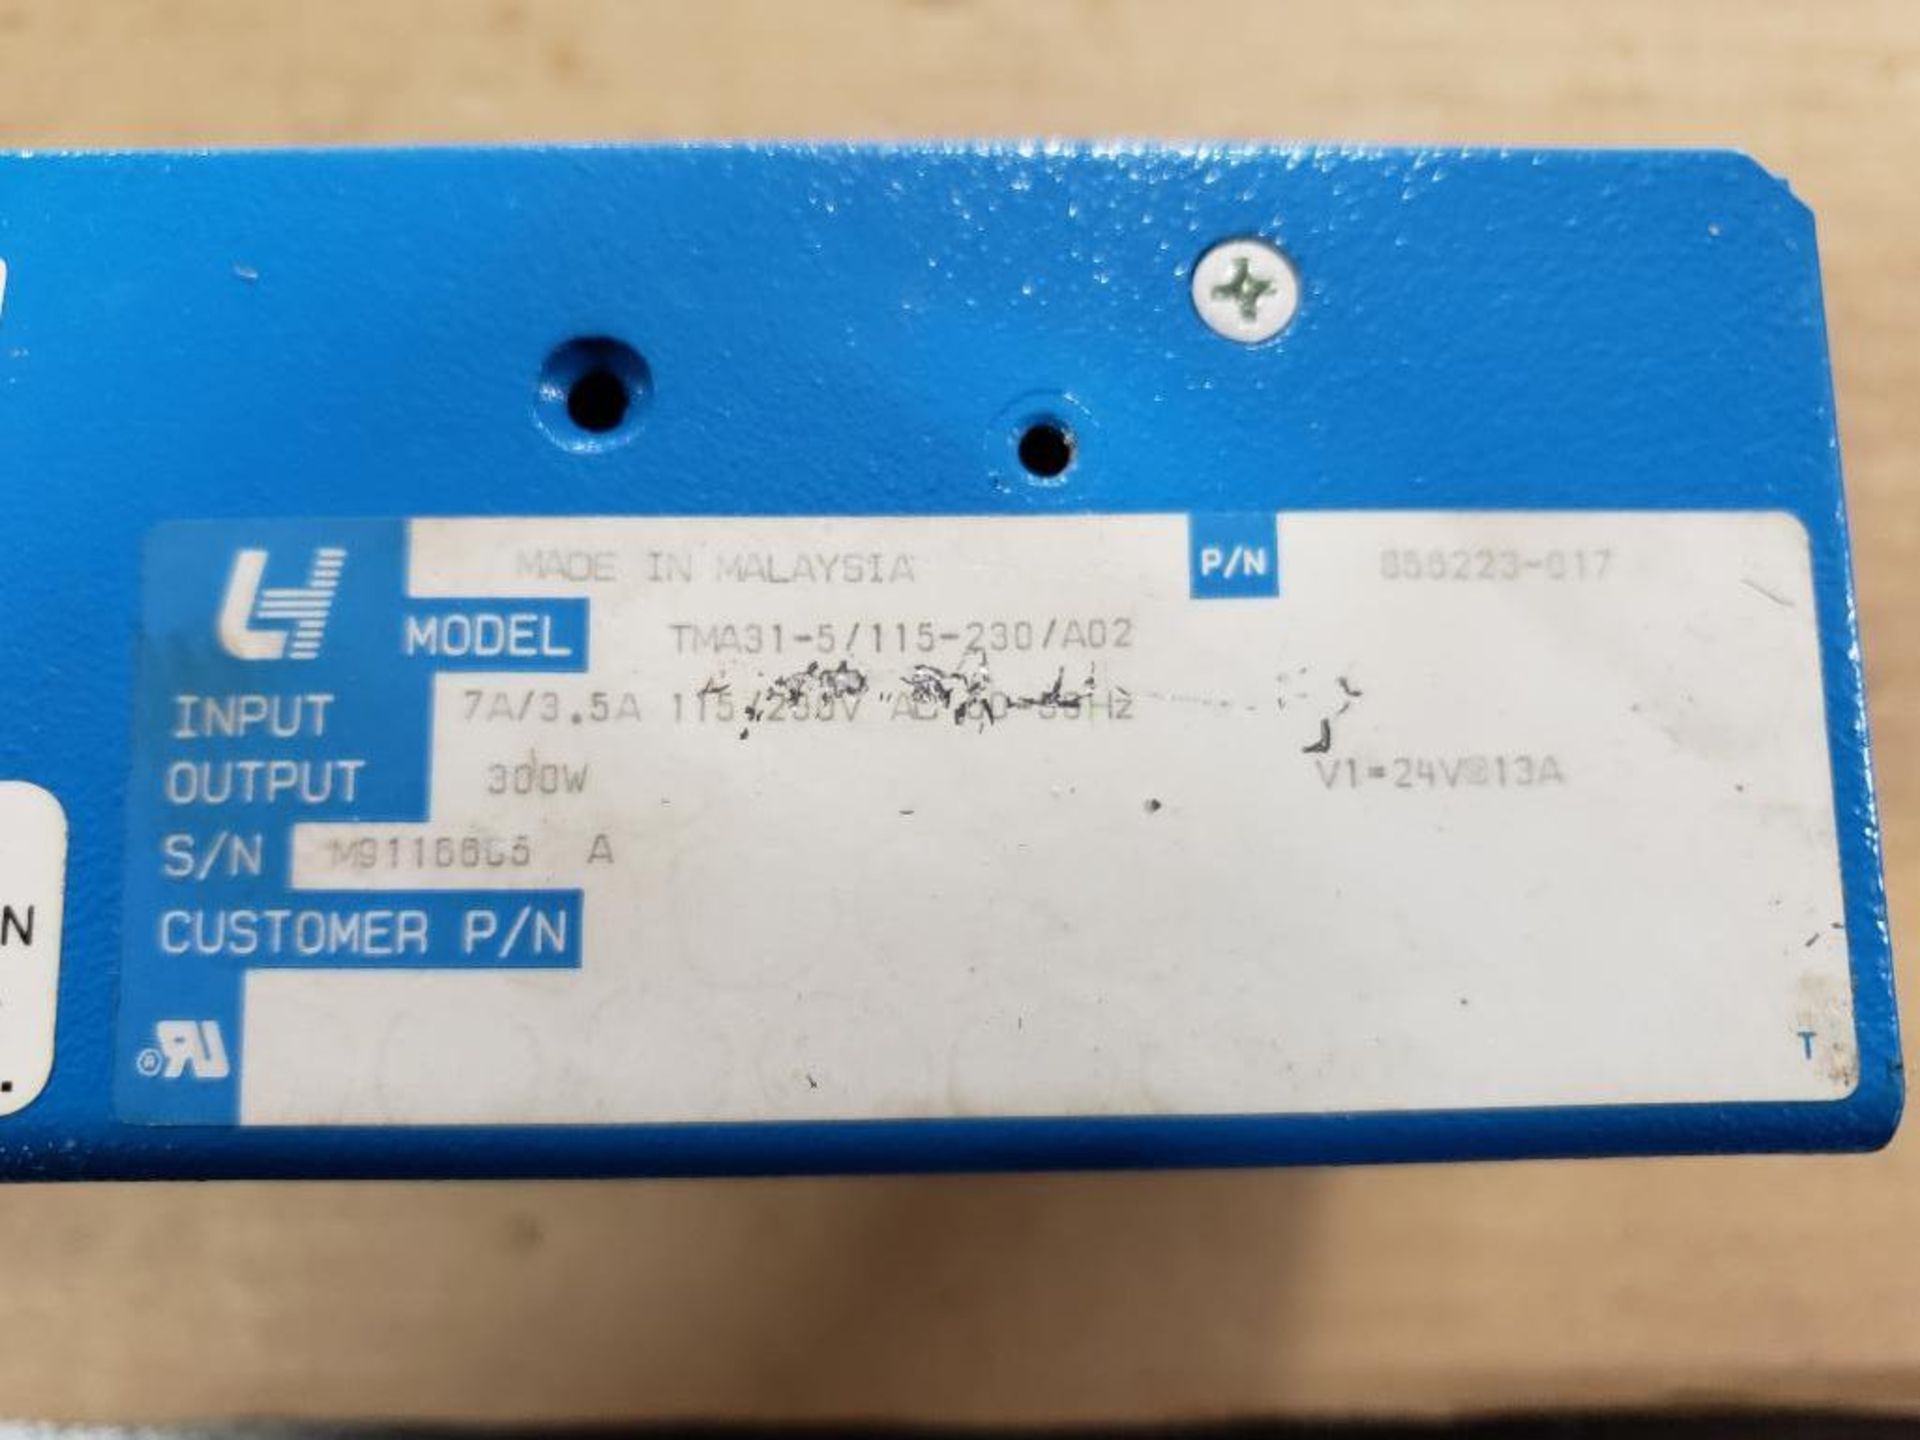 Qty 2 - Bauart Gepruft TMA31-5/115-230/A02 power supply. - Image 4 of 7